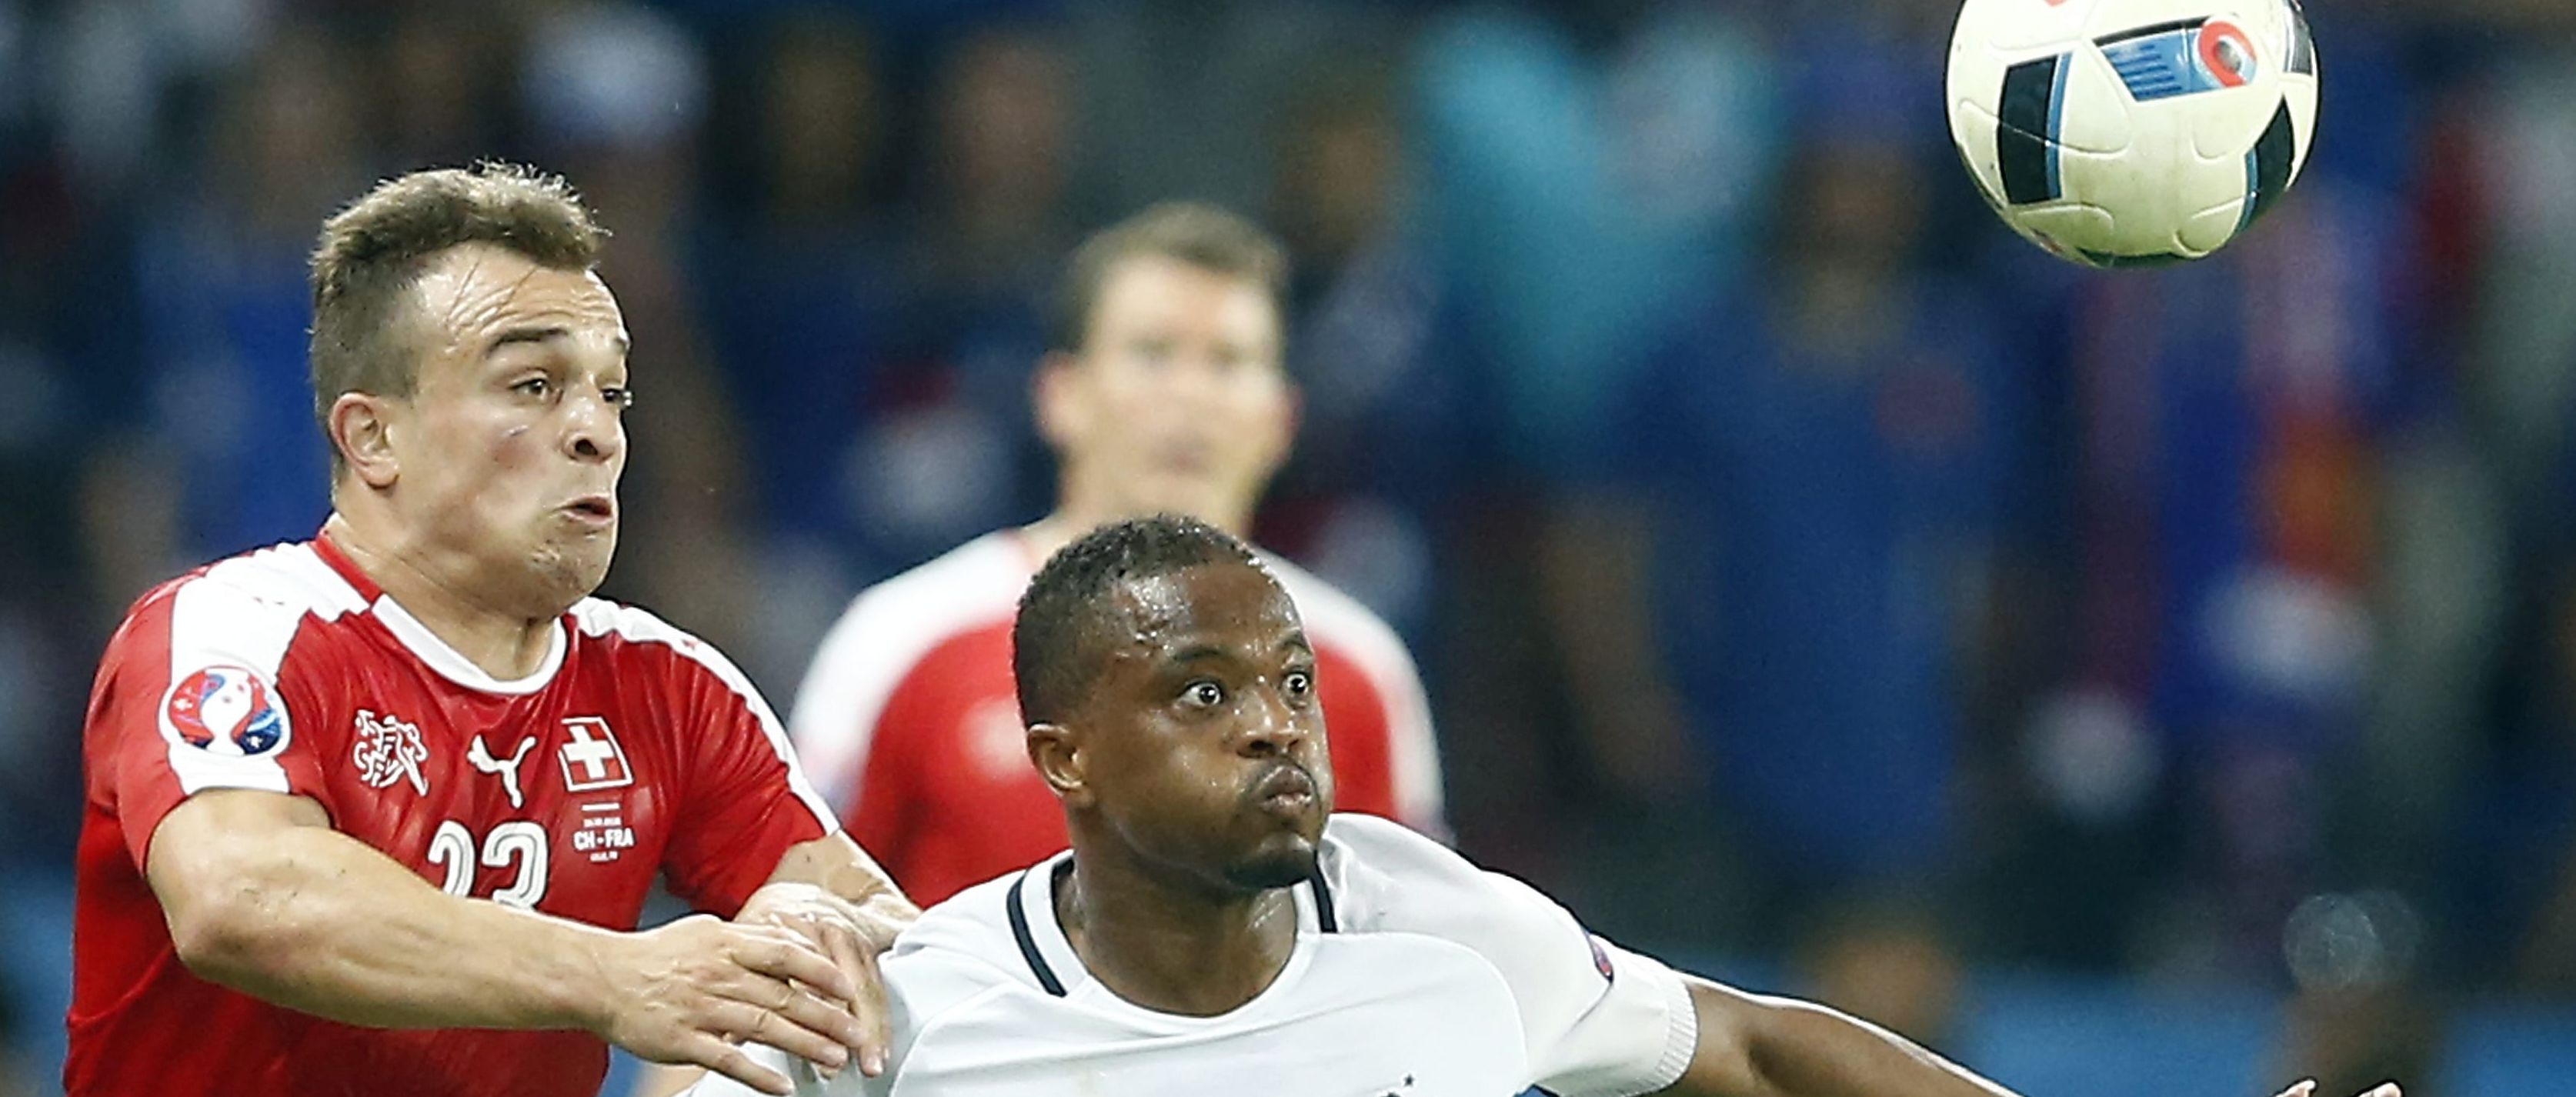 epa05378213 Xherdan Shaqiri of Switzerland (L) and Patrice Evra of France in action during the UEFA EURO 2016 group A preliminary round match between Switzerland and France at Stade Pierre Mauroy in Lille Metropole, France, 19 June 2016.

(RESTRICTIONS APPLY: For editorial news reporting purposes only. Not used for commercial or marketing purposes without prior written approval of UEFA. Images must appear as still images and must not emulate match action video footage. Photographs published in online publications (whether via the Internet or otherwise) shall have an interval of at least 20 seconds between the posting.)  EPA/ROLEX DELA PENA   EDITORIAL USE ONLY